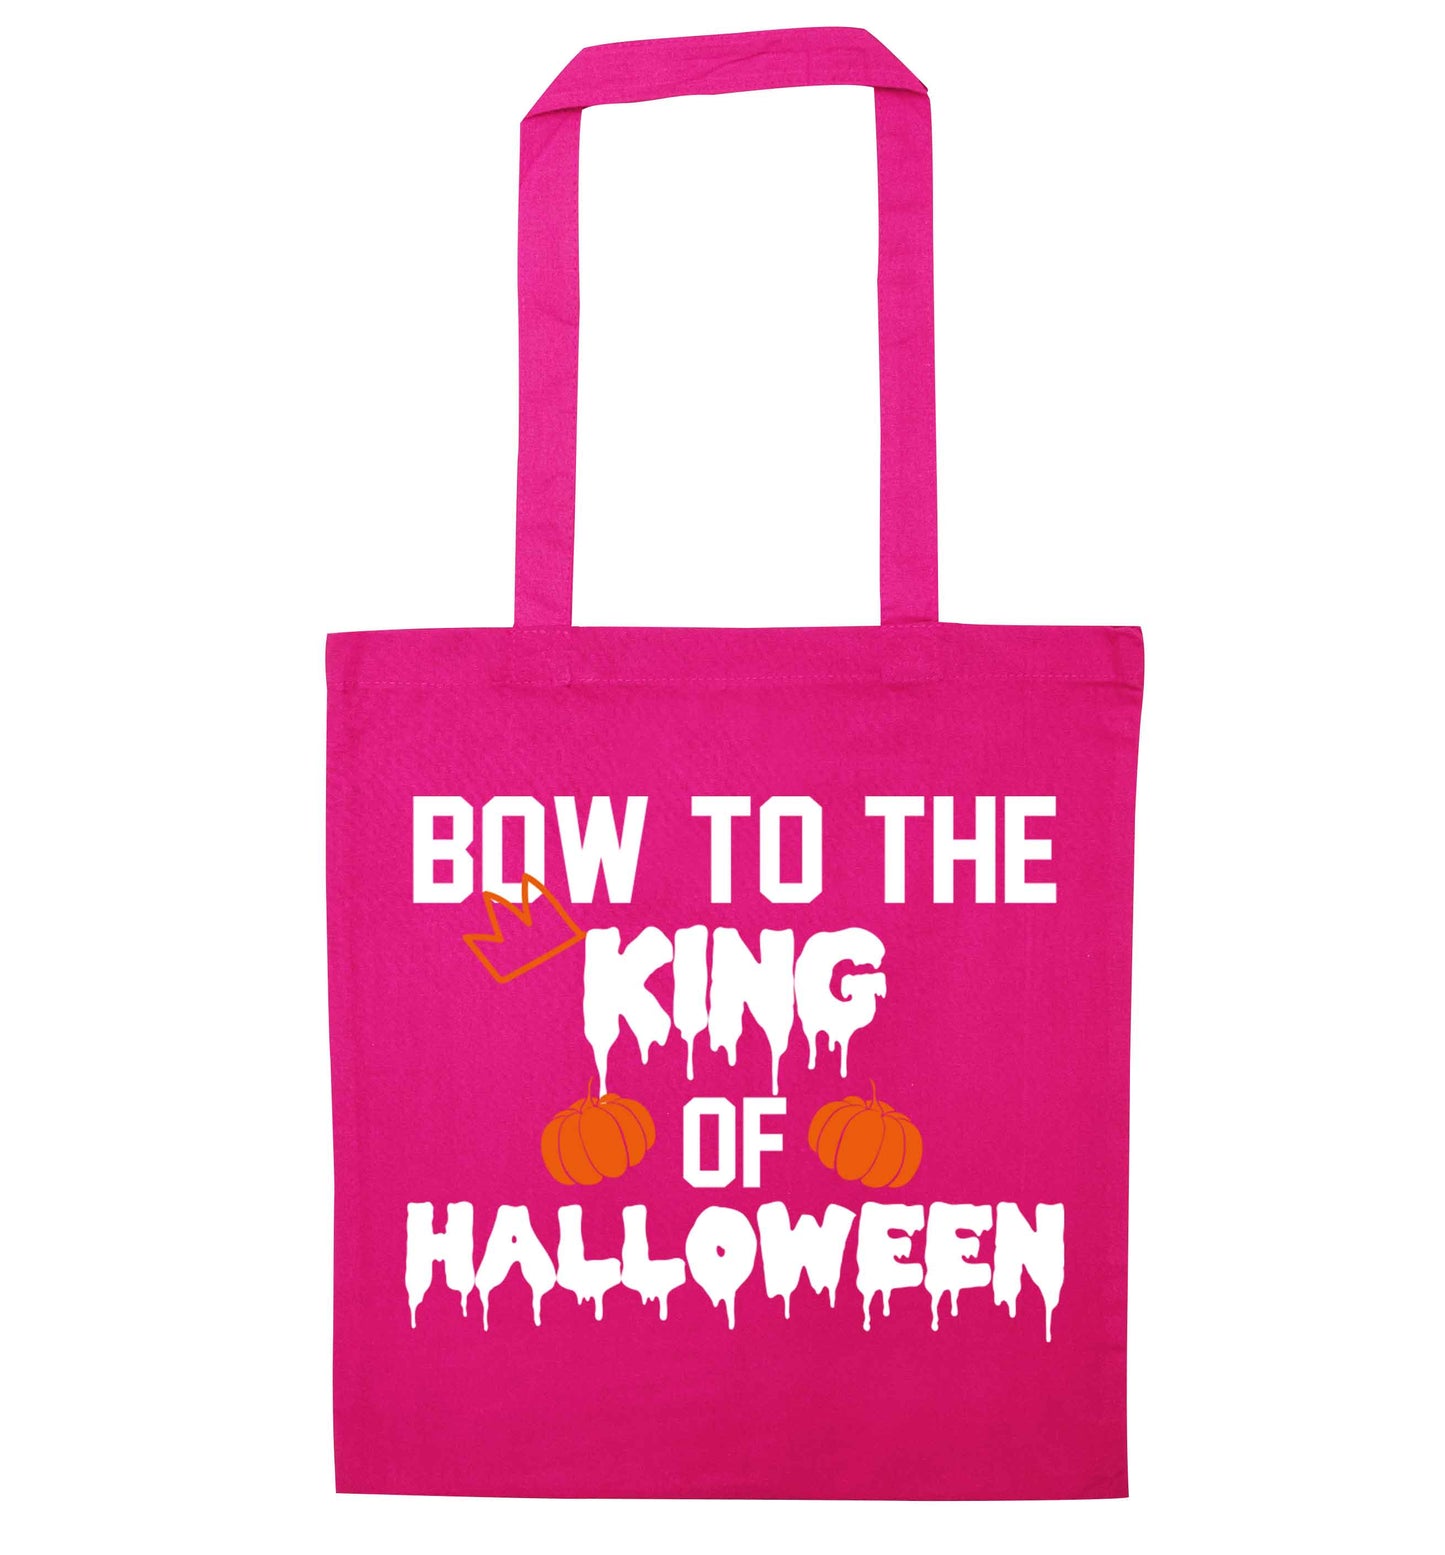 Bow to the King of halloween pink tote bag